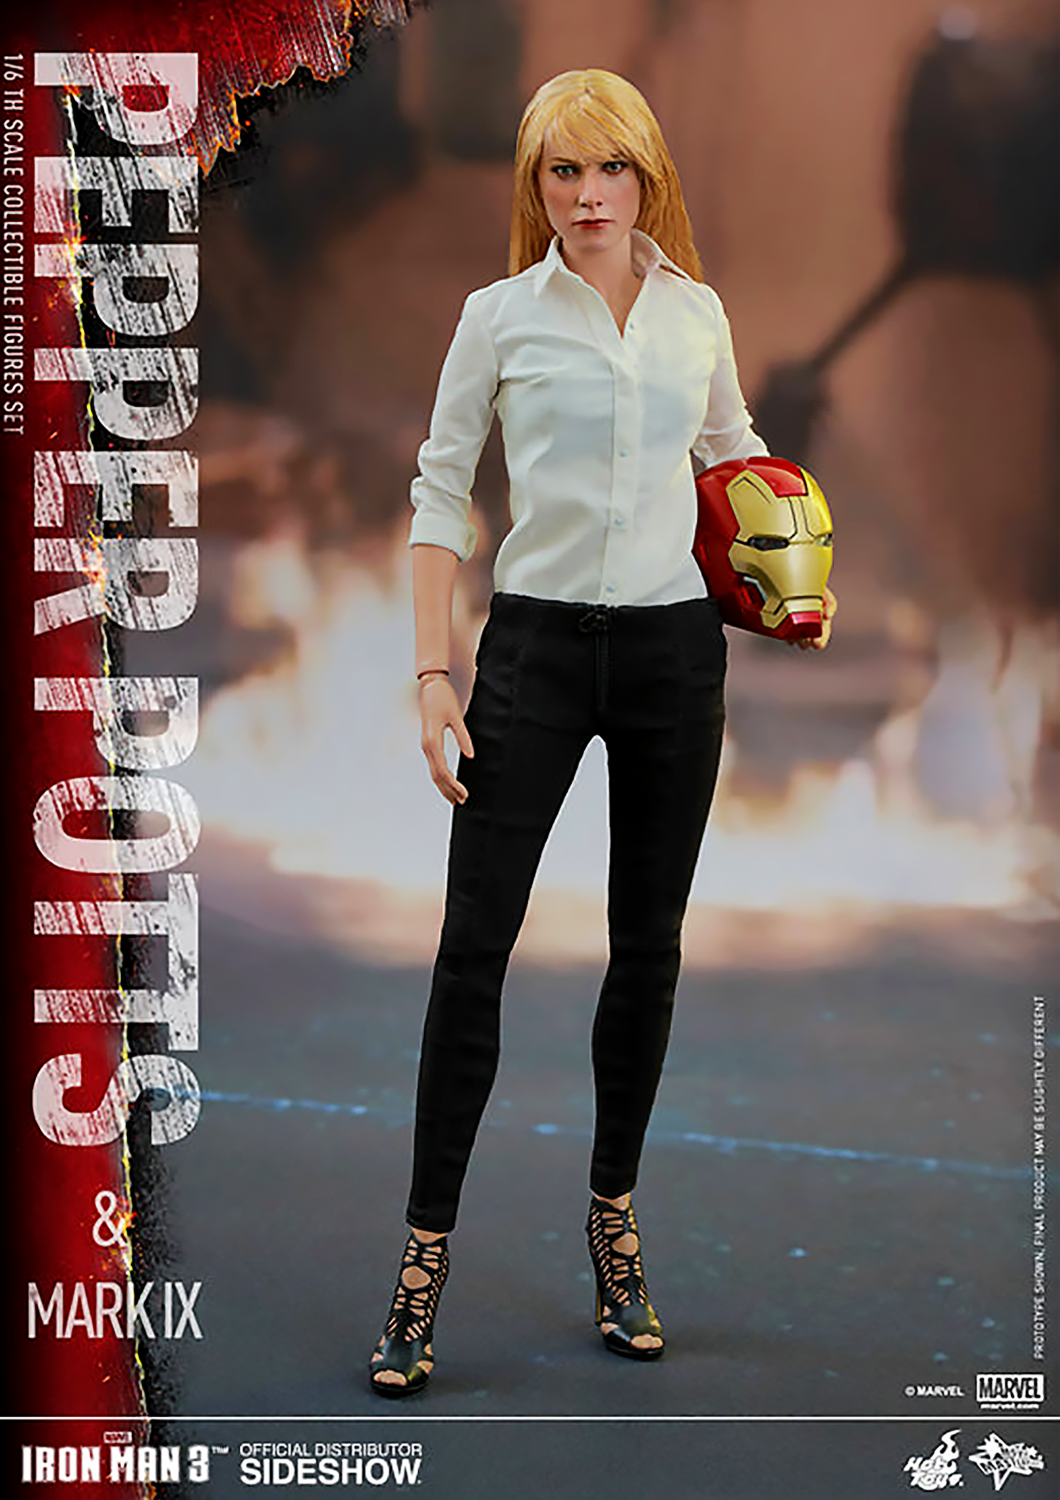 HOT TOYS MARVEL IRON MAN 3 : PEPPER POTTS 1/6 MMS310 - Anotoys Collectibles